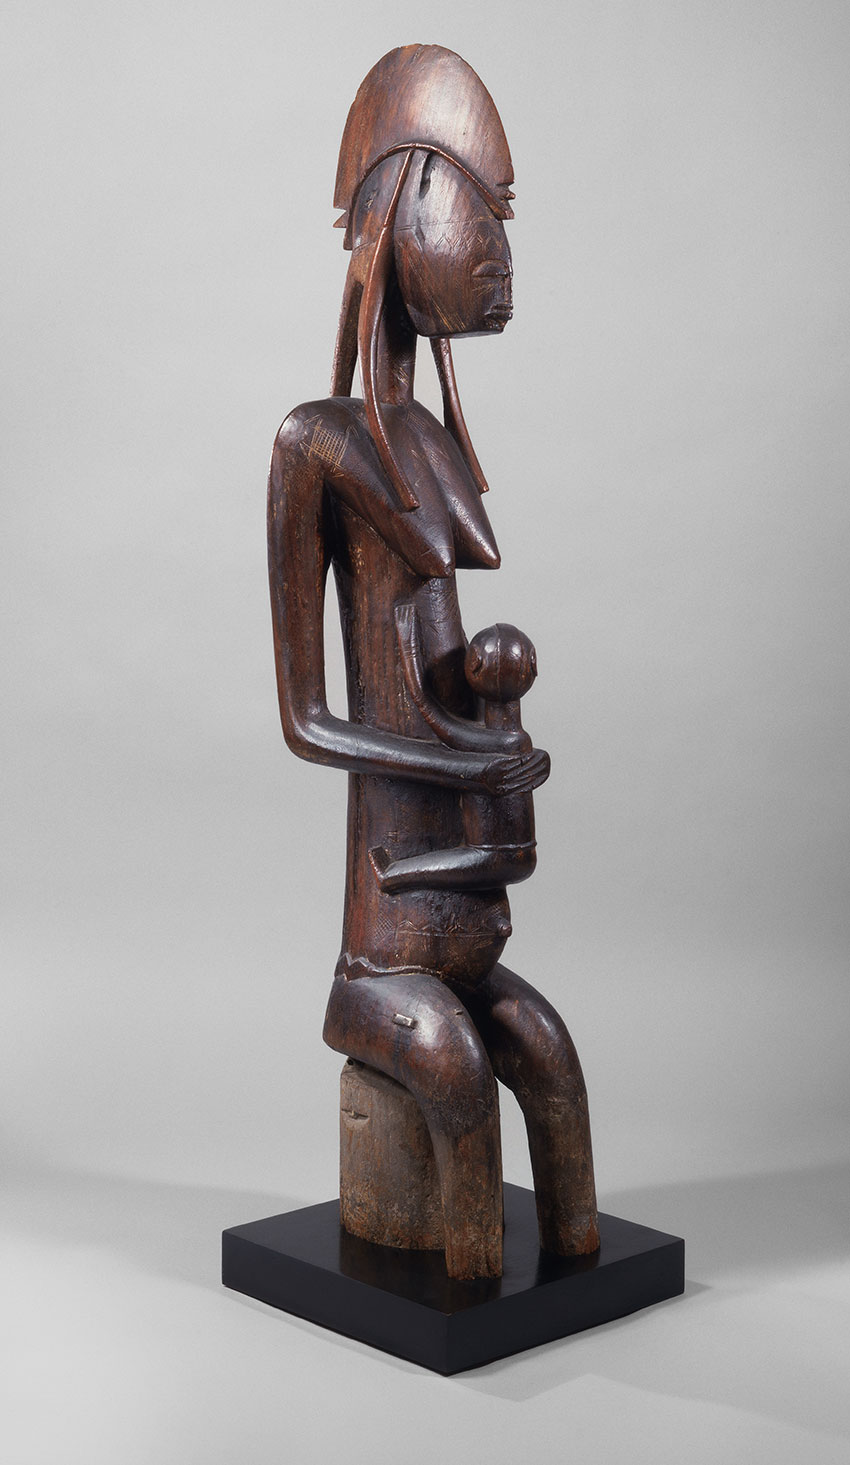 Mother and Child. Mali, Bamana peoples. 15th–early 20th century. Wood_African Art